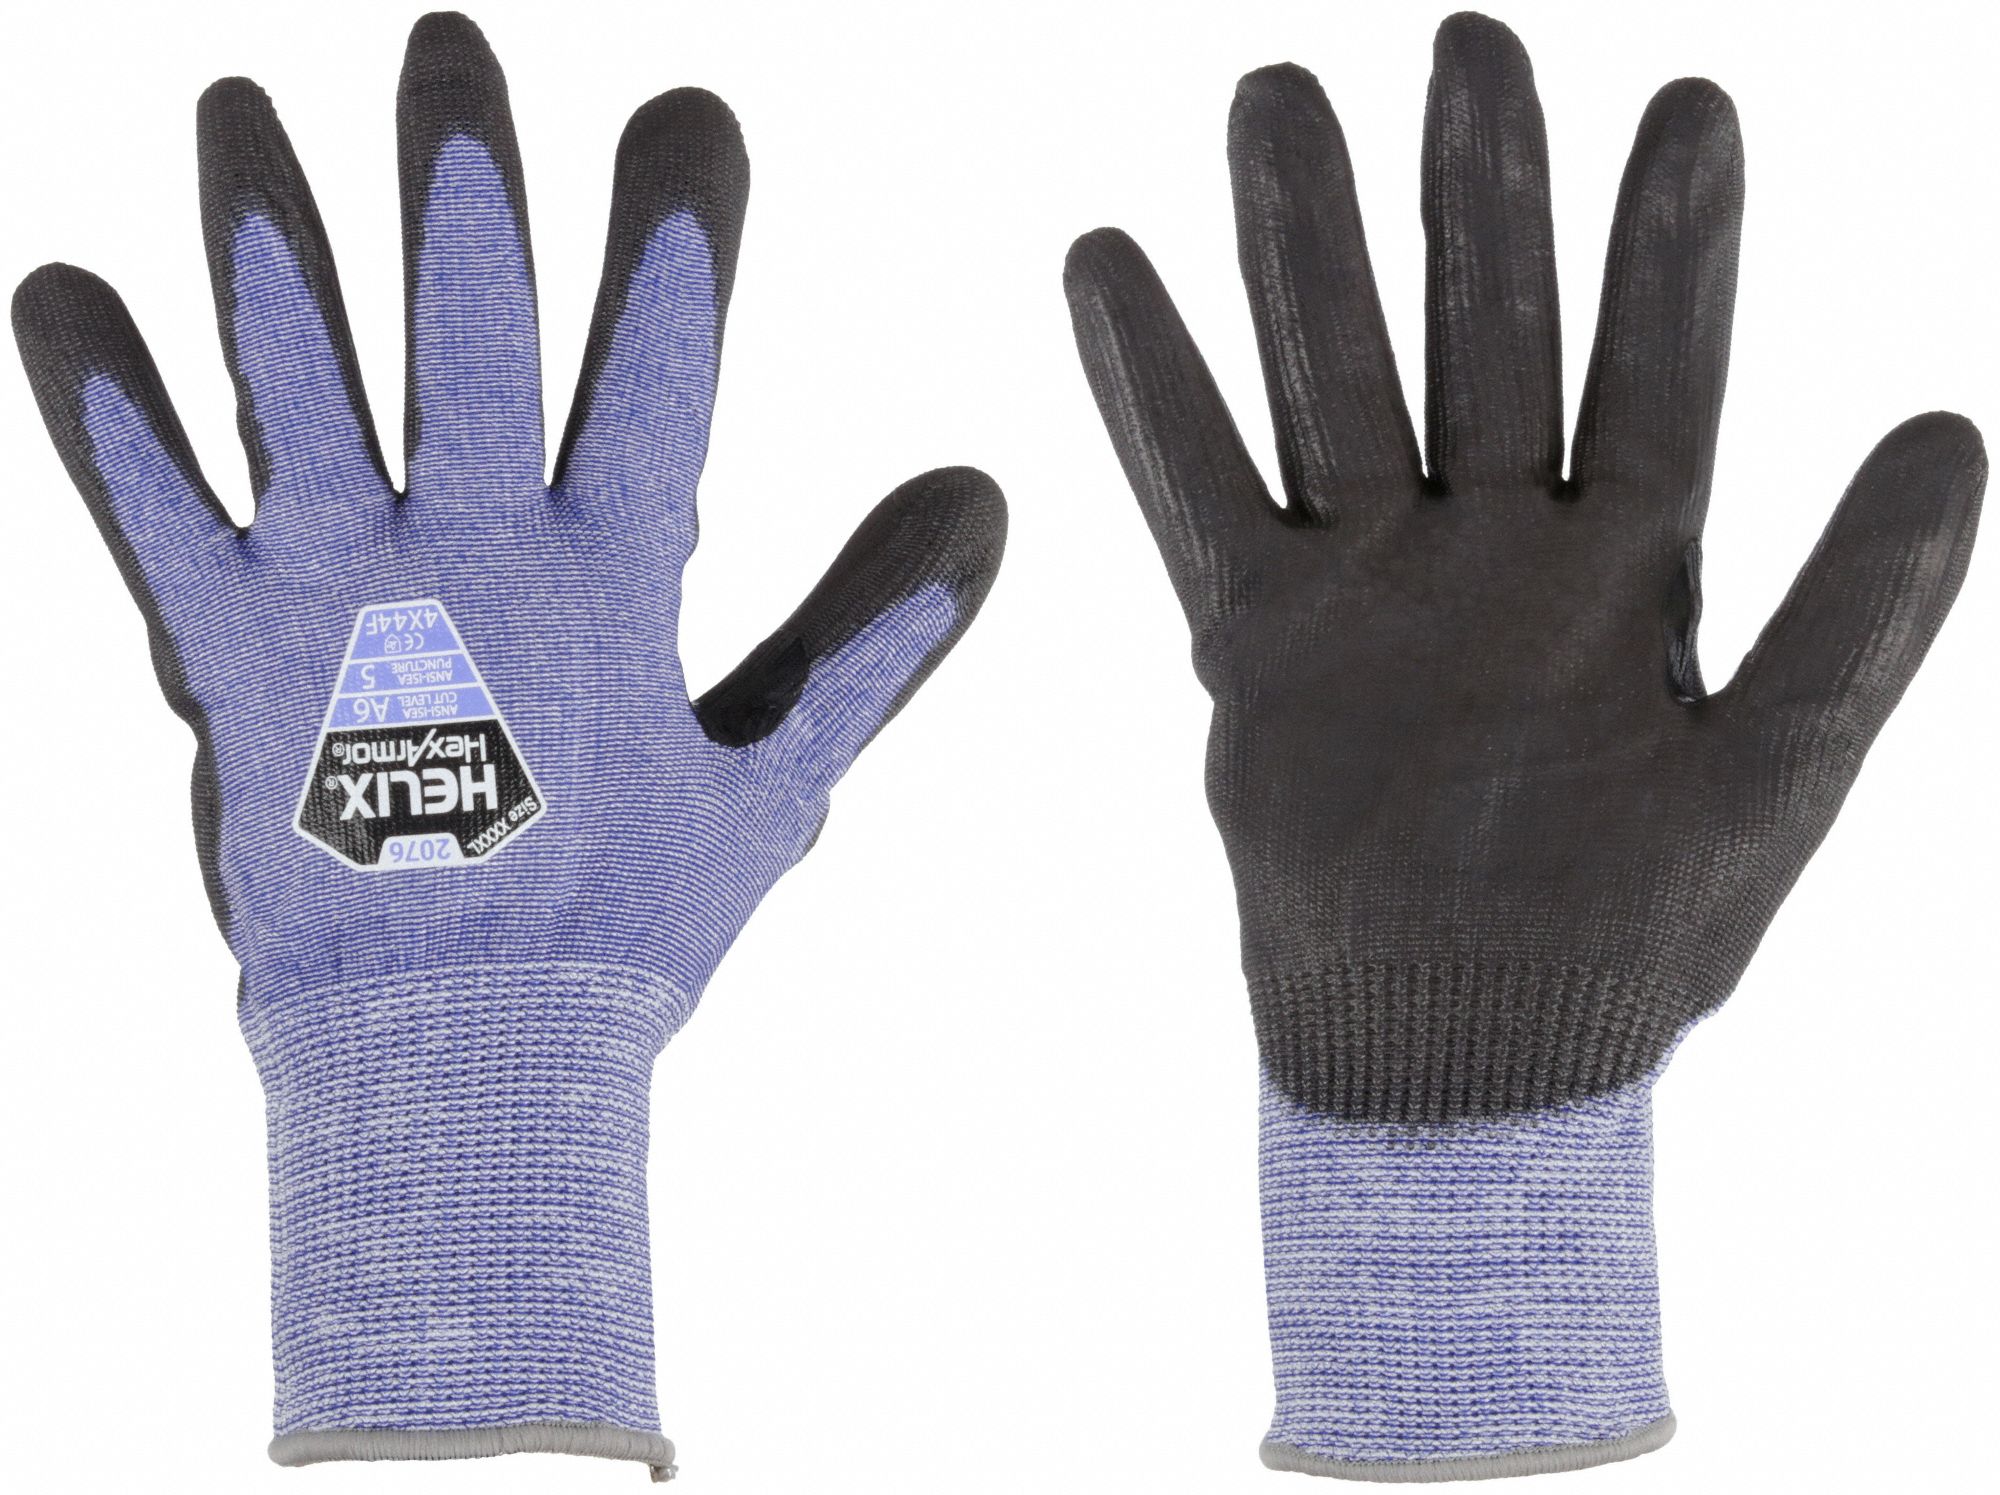 RAZOR X5 Cut Resistant Breathable Nitrile Coated Glove, Hand Protection